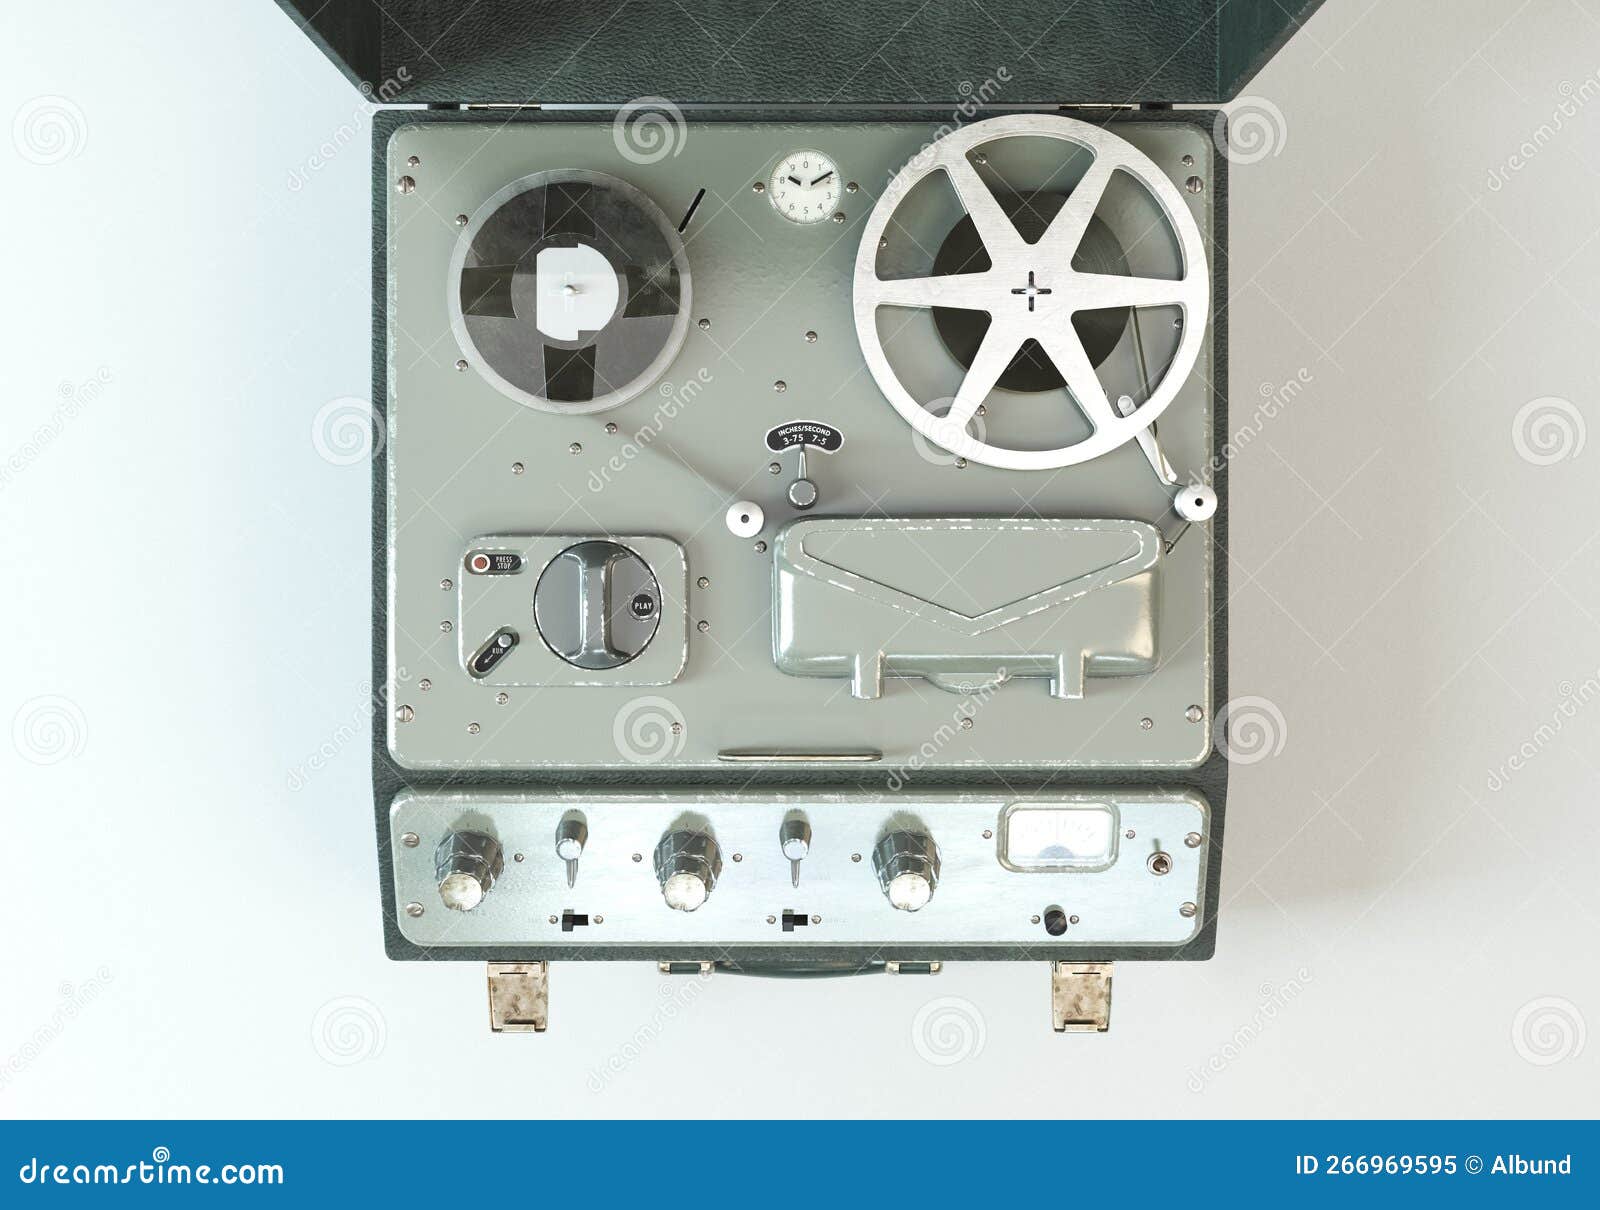 Vintage Anaologue Reel To Reel Recorder Stock Image - Image of sound,  videotape: 266969595